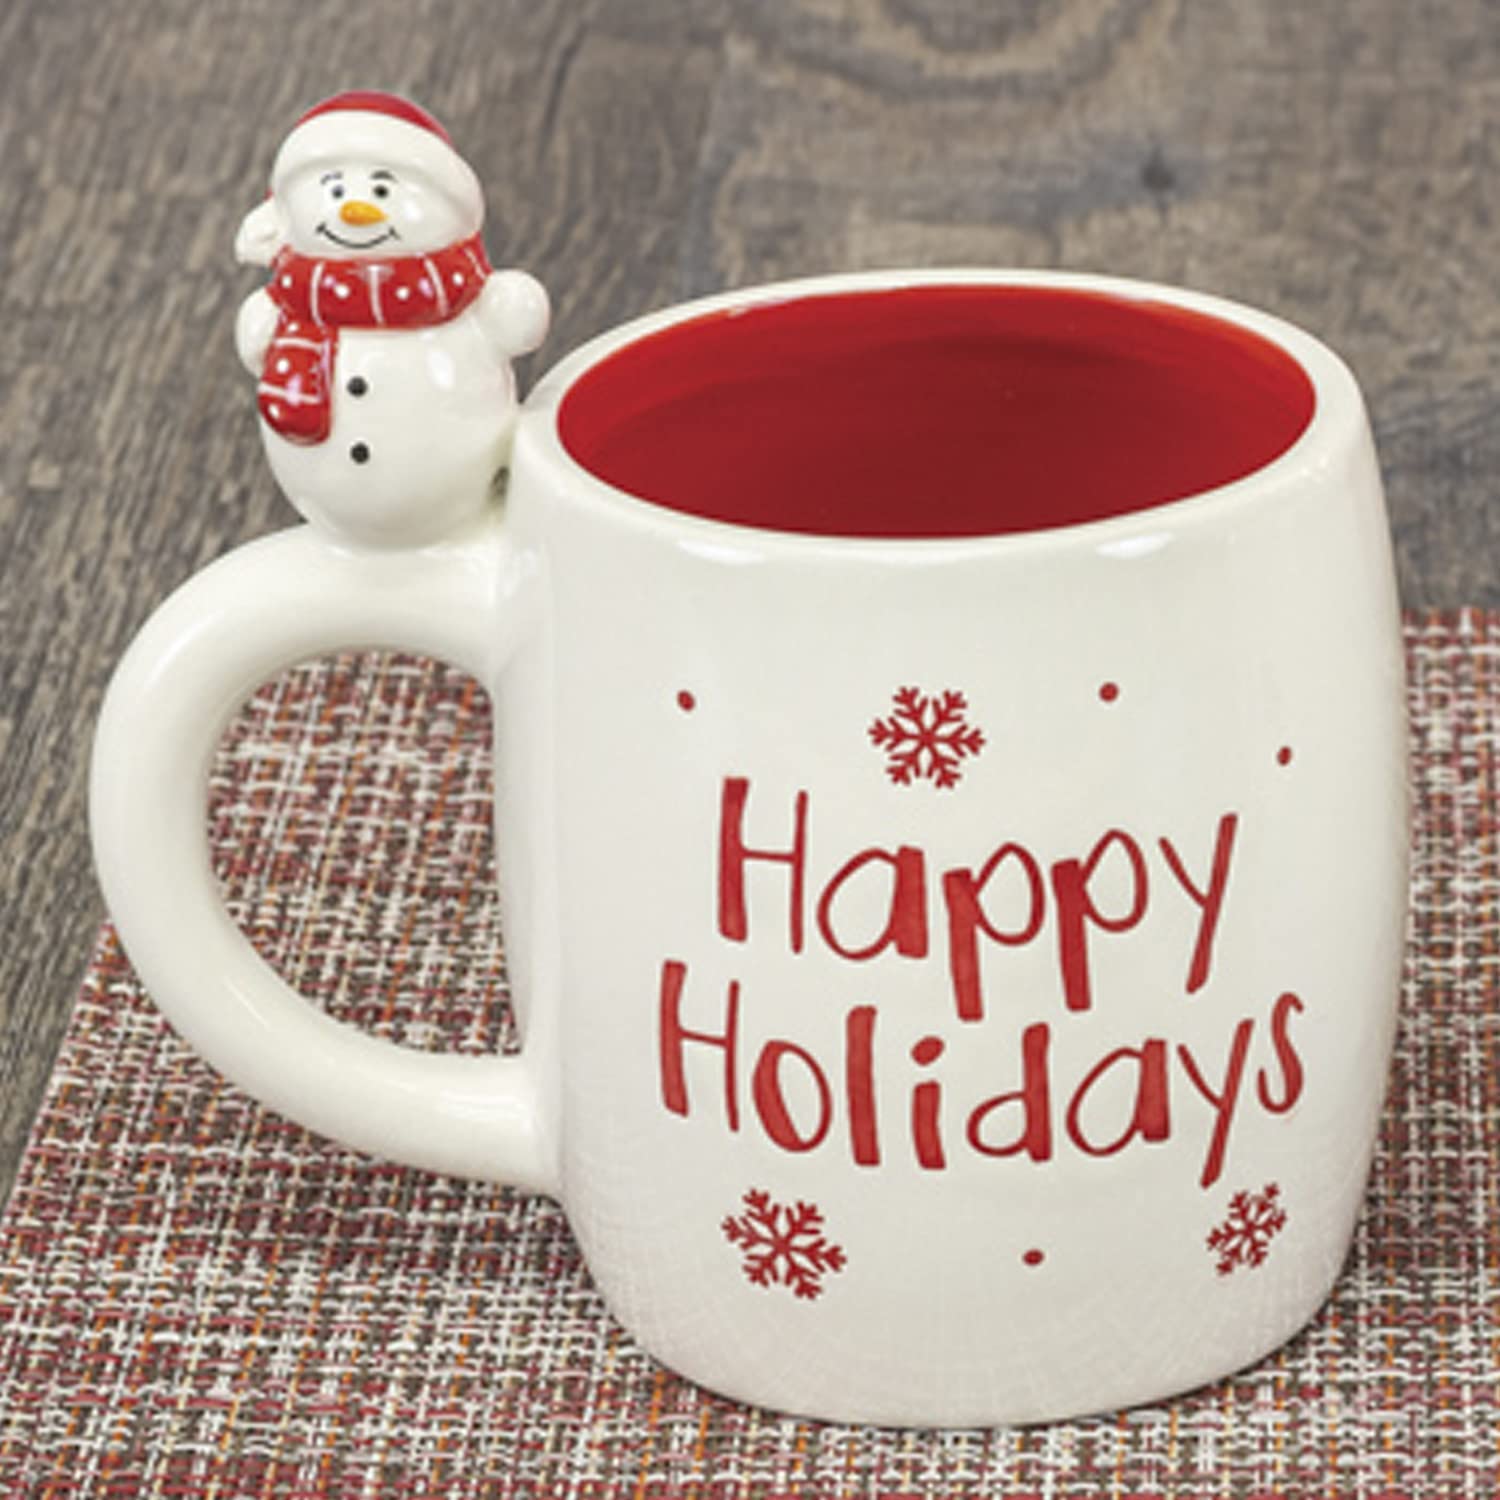 Ceramic Red Decorative Christmas Coffee Mug Tea Cup with Snowman Handle and  Happy Holidays Saying - Xmas Tabletop Countertop Decoration - Home and